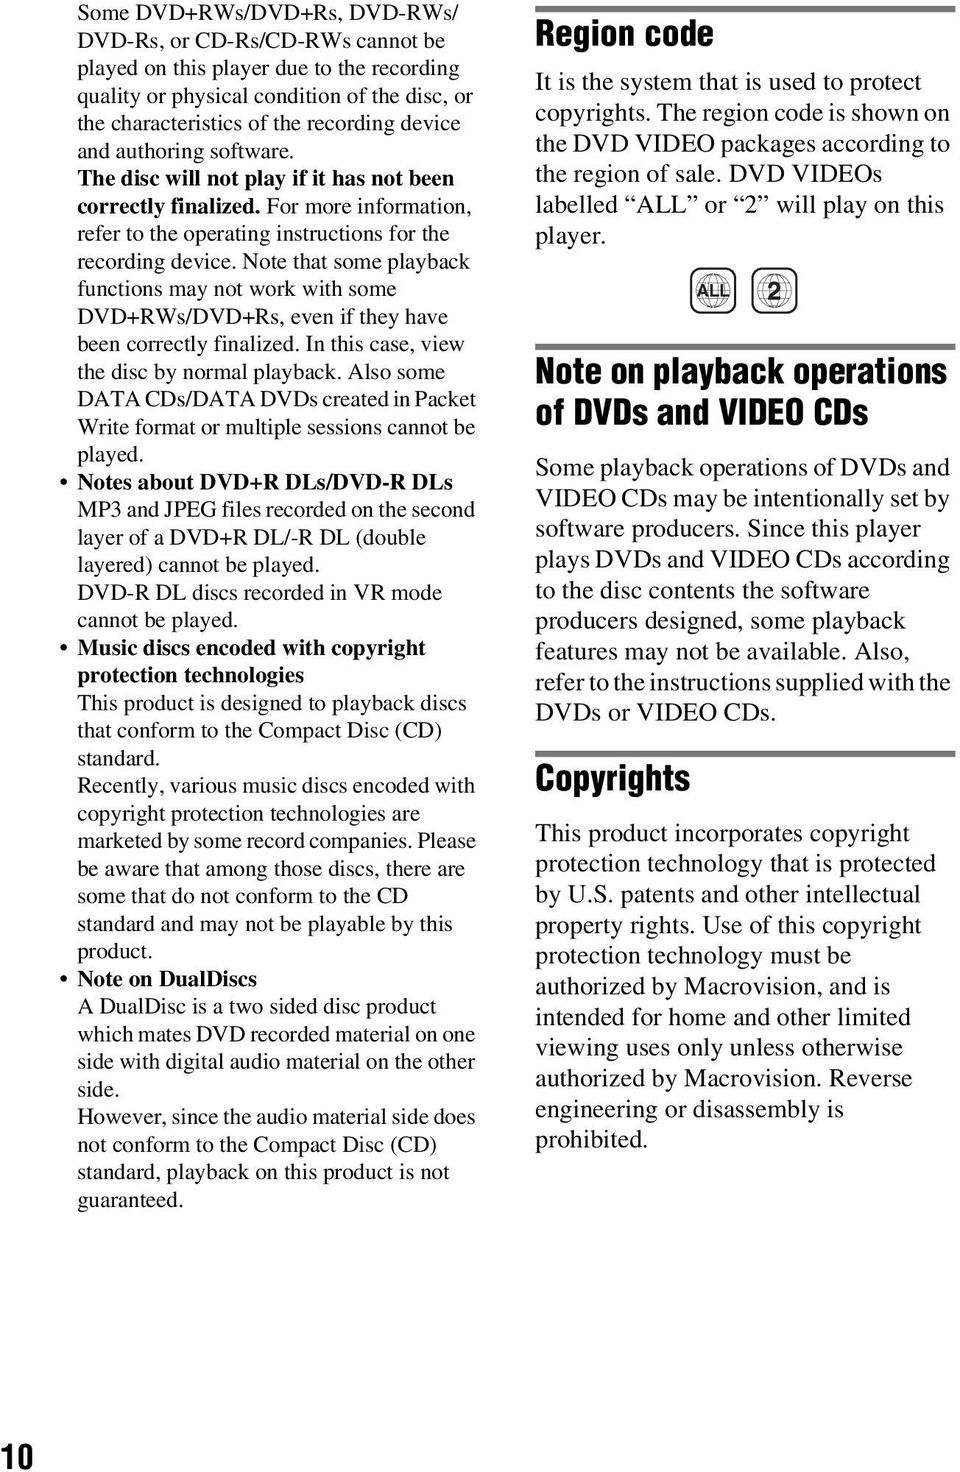 Note that some playback functions may not work with some DVD+RWs/DVD+Rs, even if they have been correctly finalized. In this case, view the disc by normal playback.